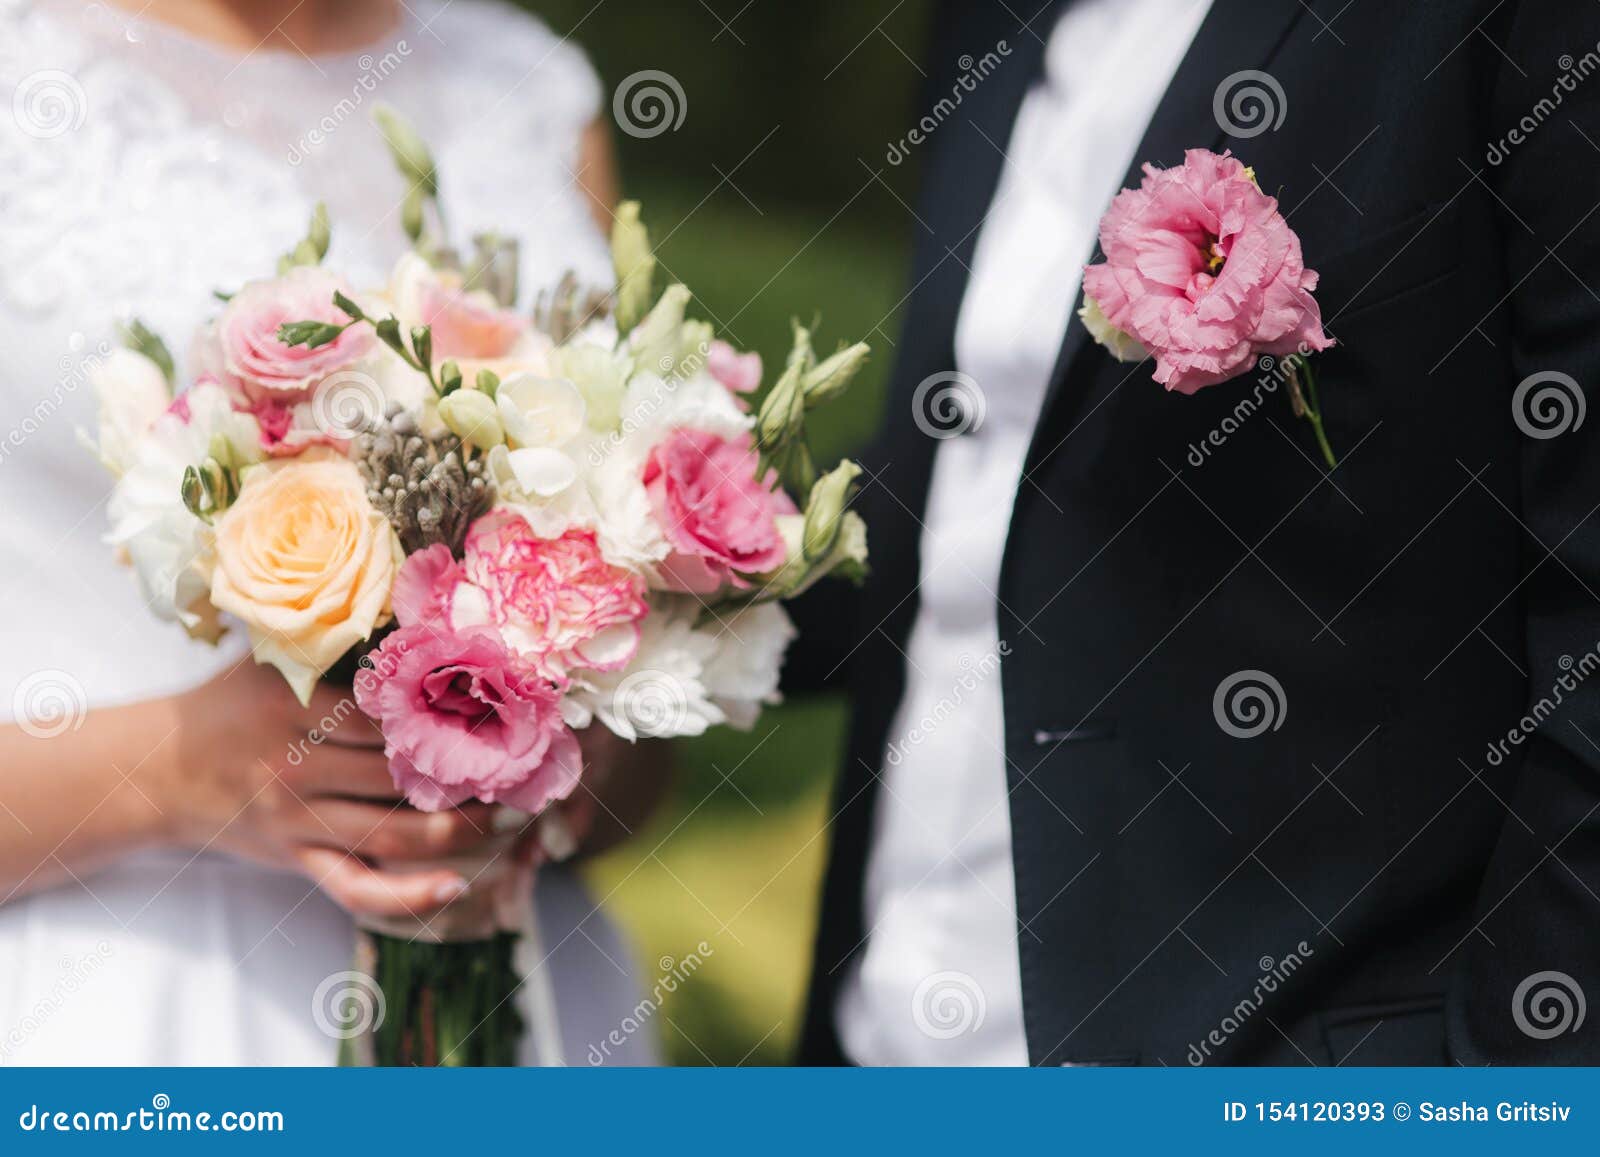 Wedding Bouquet in Brides Hands. Close Up View of Couples Hands Holding ...